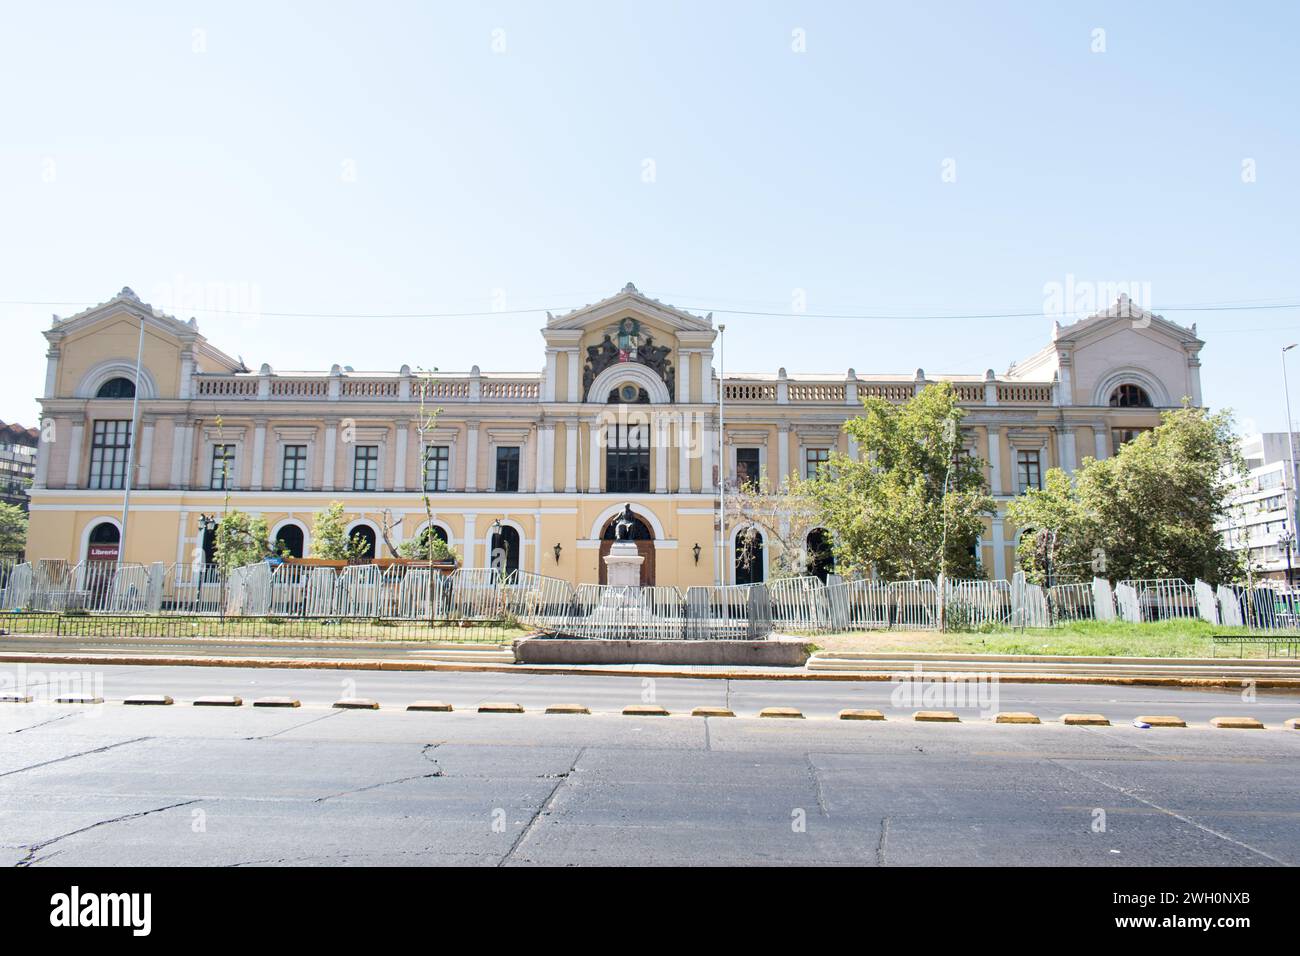 Universidad de Chile, founded in 1842, is one of the oldest and most prestigious universities in Chile. Stock Photo